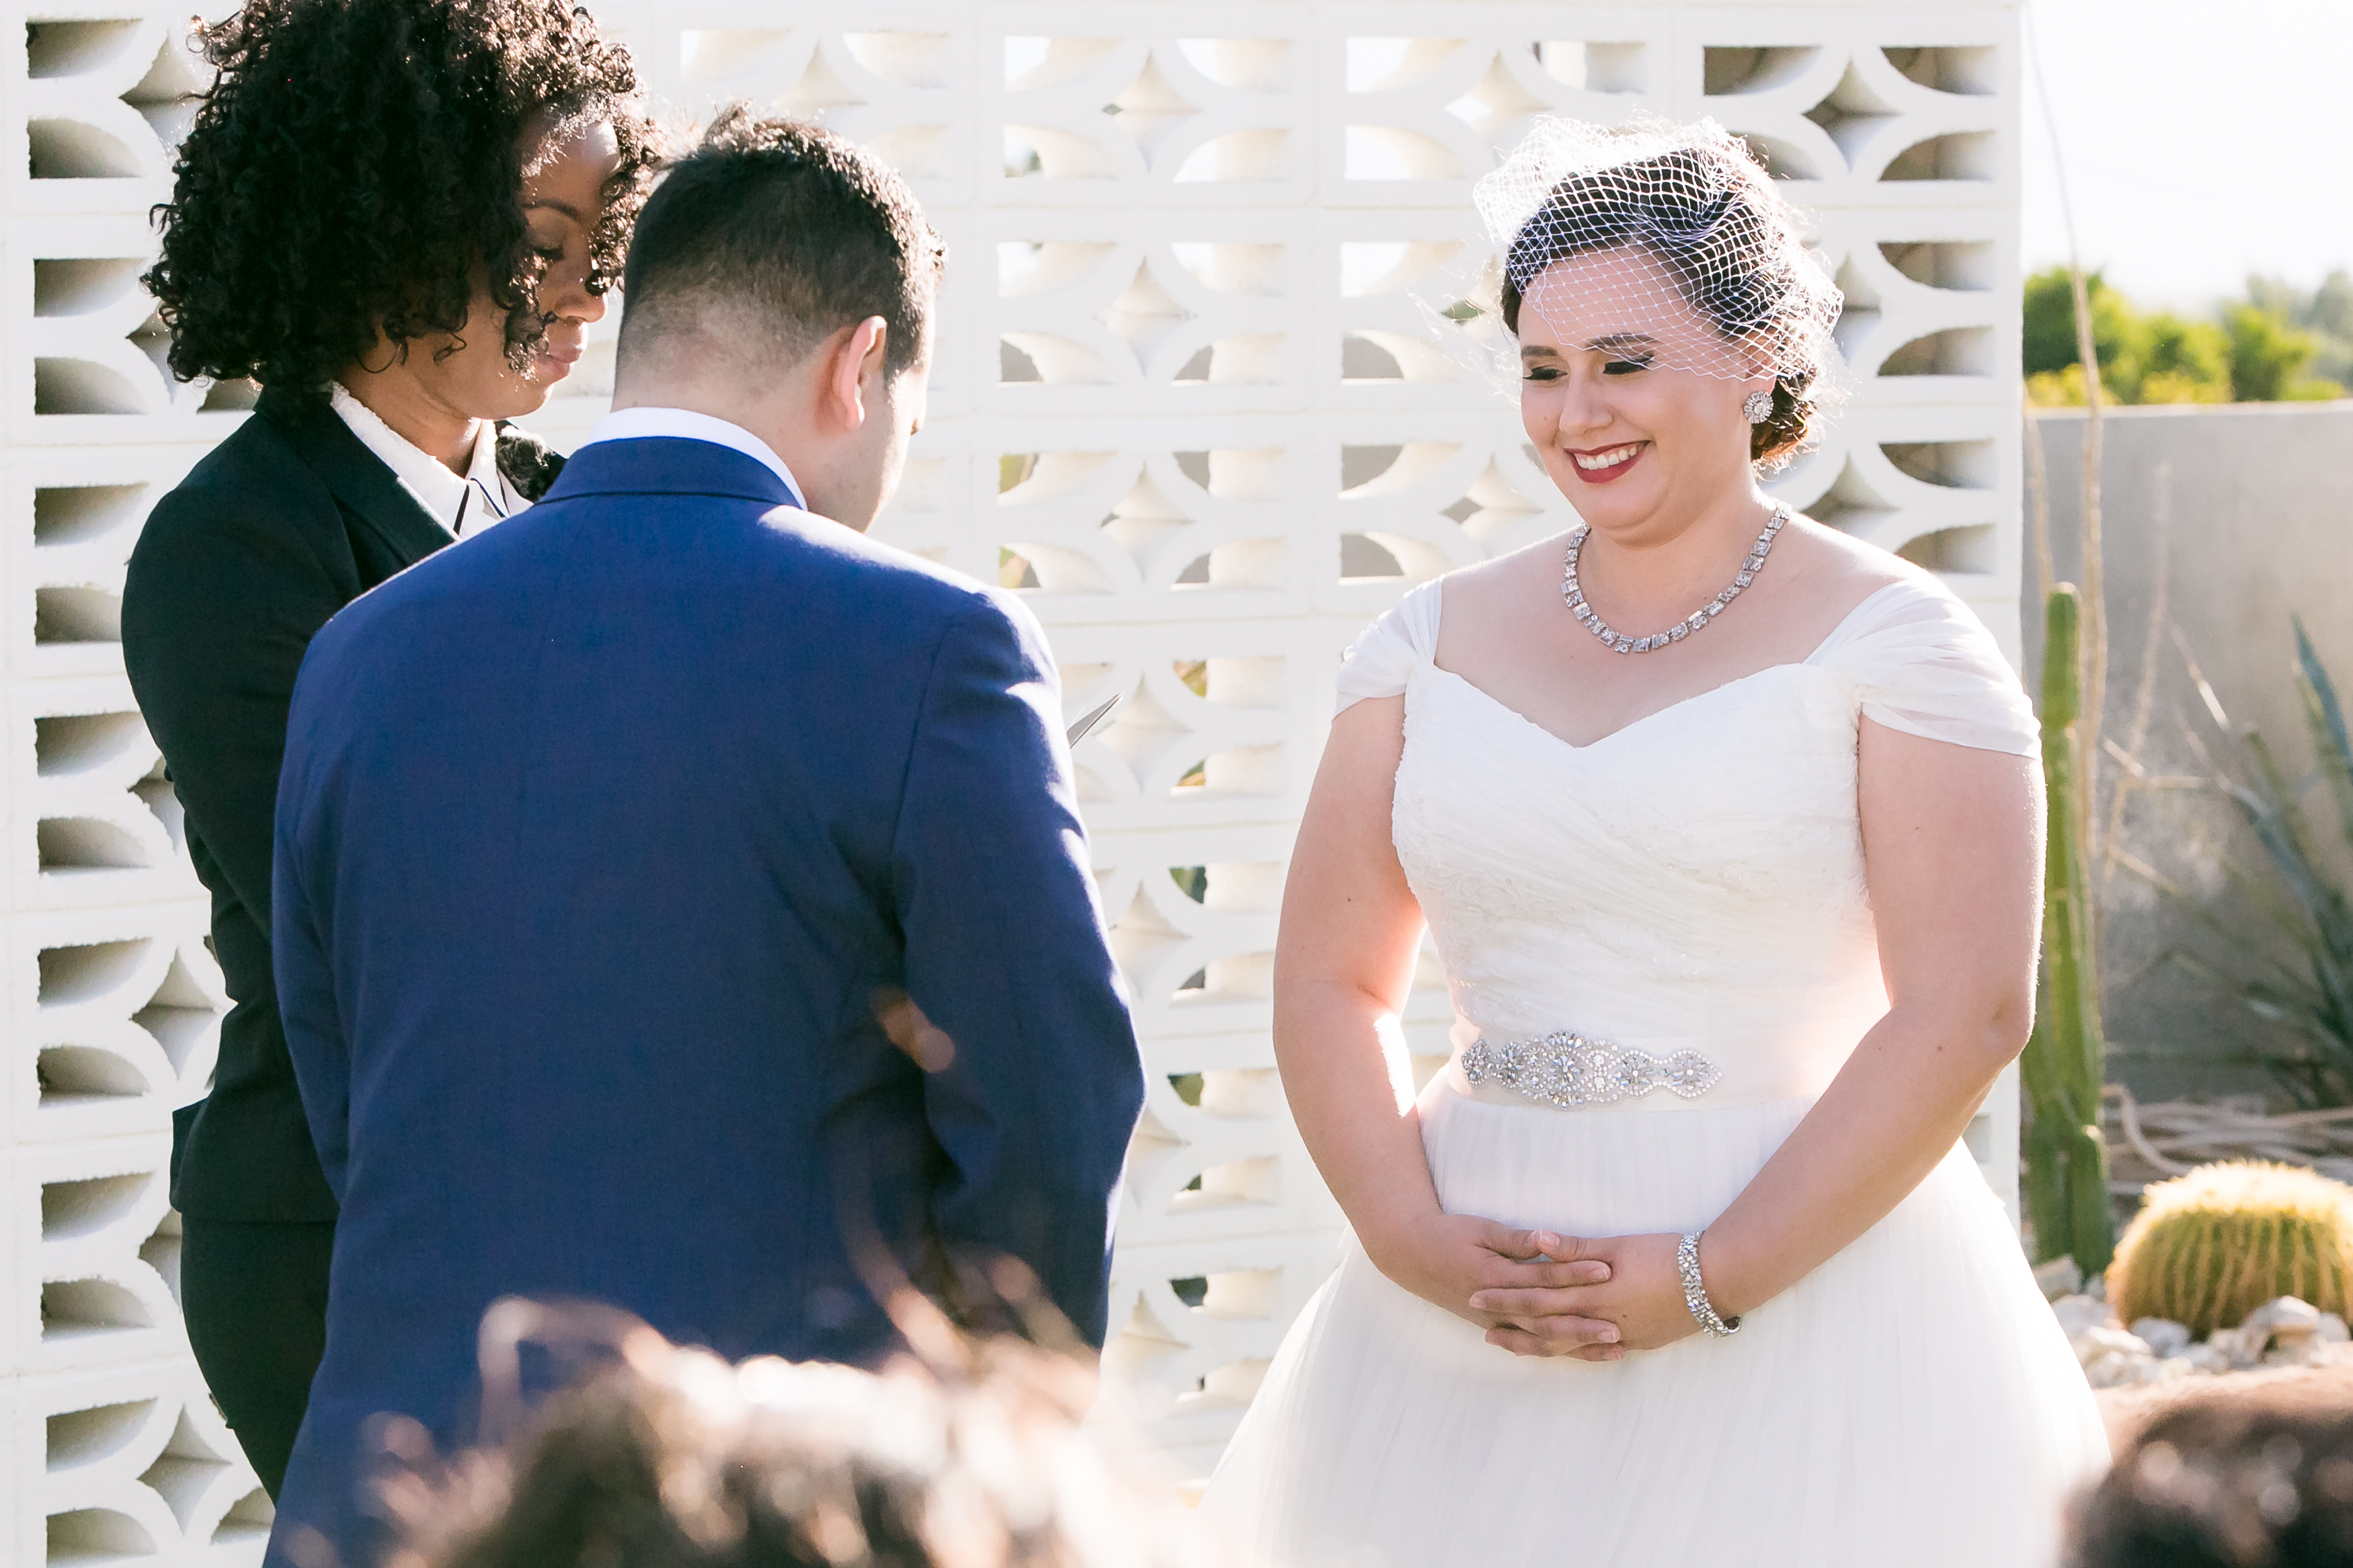 Bride giggling at groom during wedding ceremony at The Lautner, CA